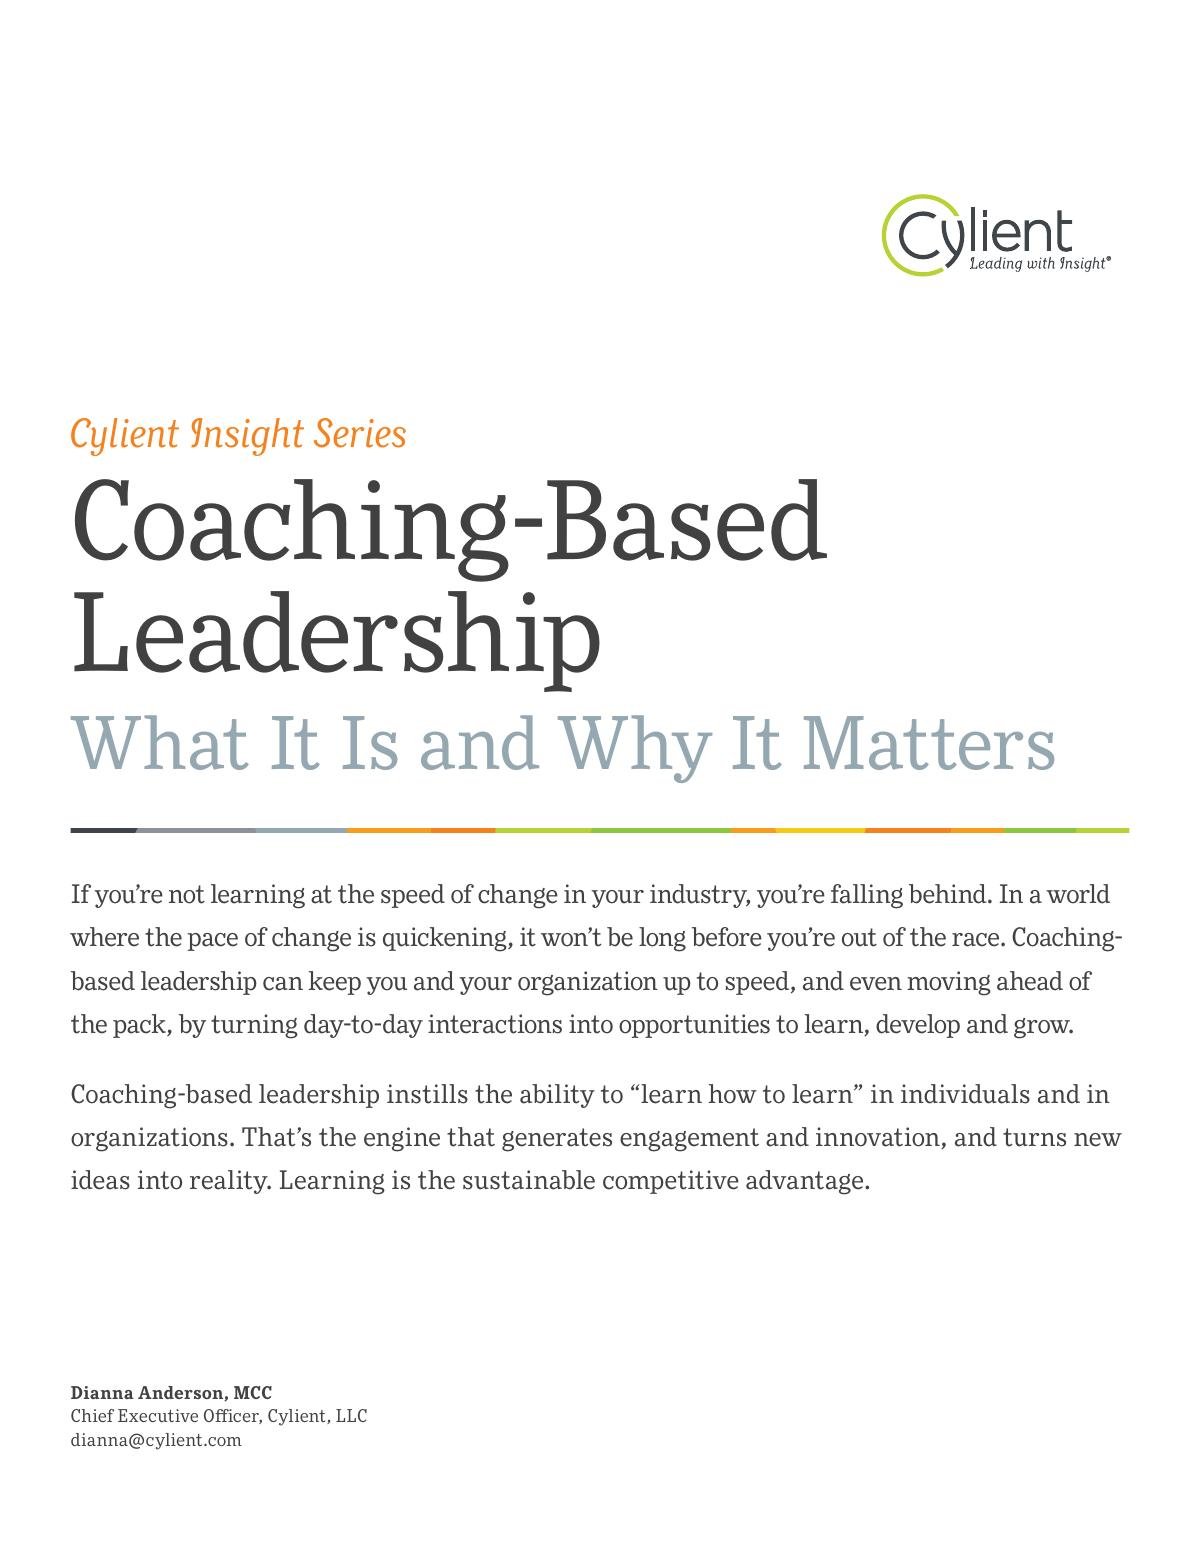 Coaching-Based Leadership: What It Is and Why It Matters